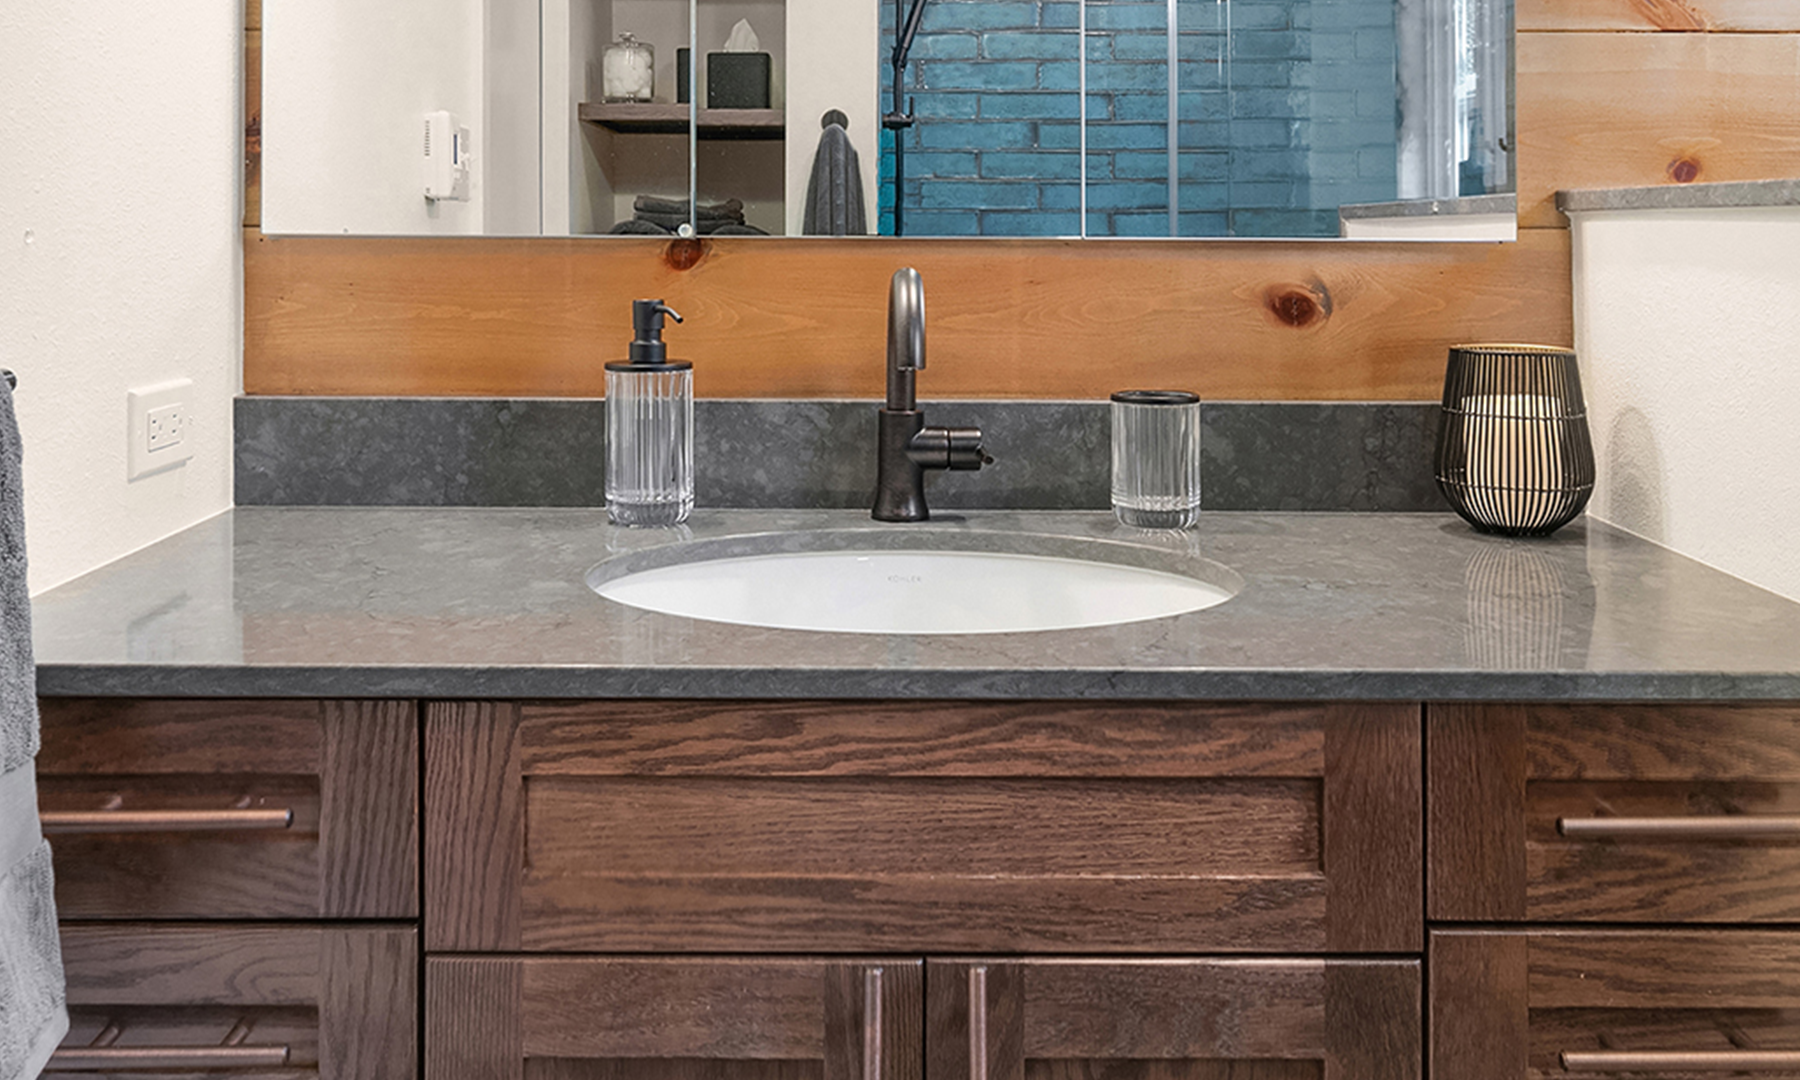 Undermount sink under a dark gray stone counter with aged bronze faucet and dark wood vanity and cladding walls